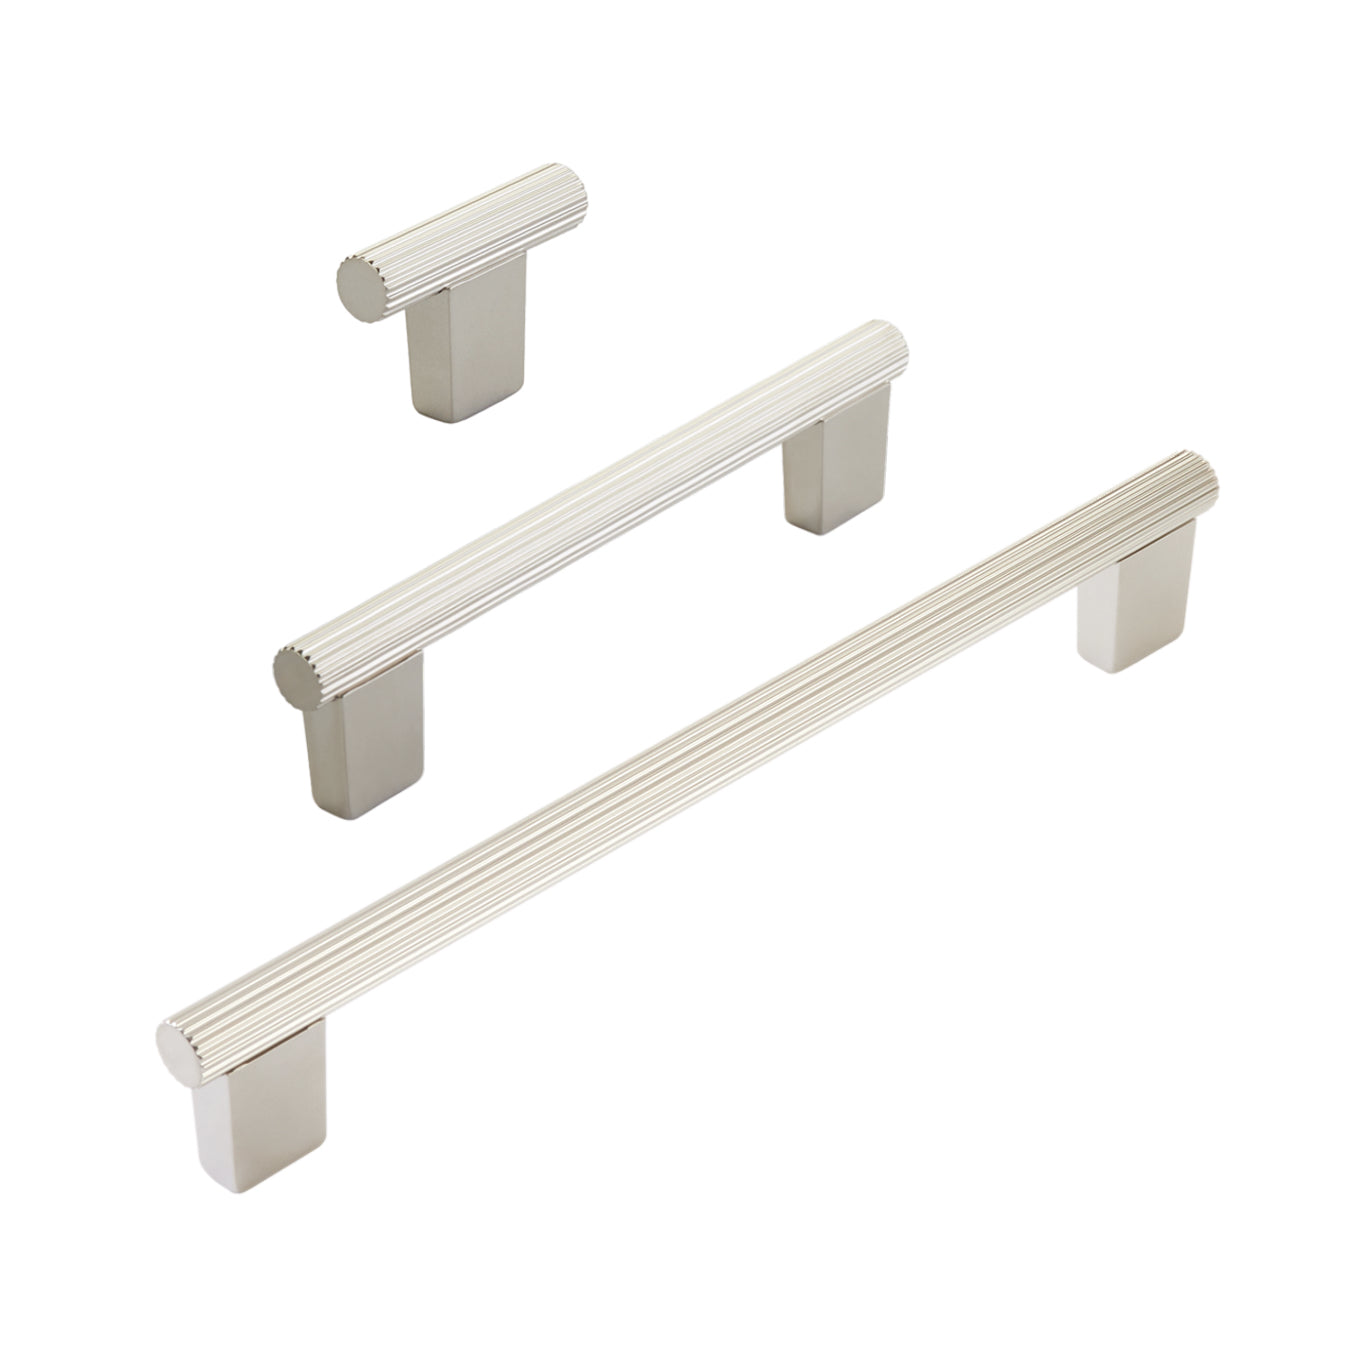 Brushed Nickel "Knox" Cabinet Knobs and Drawer Pulls - Industry Hardware